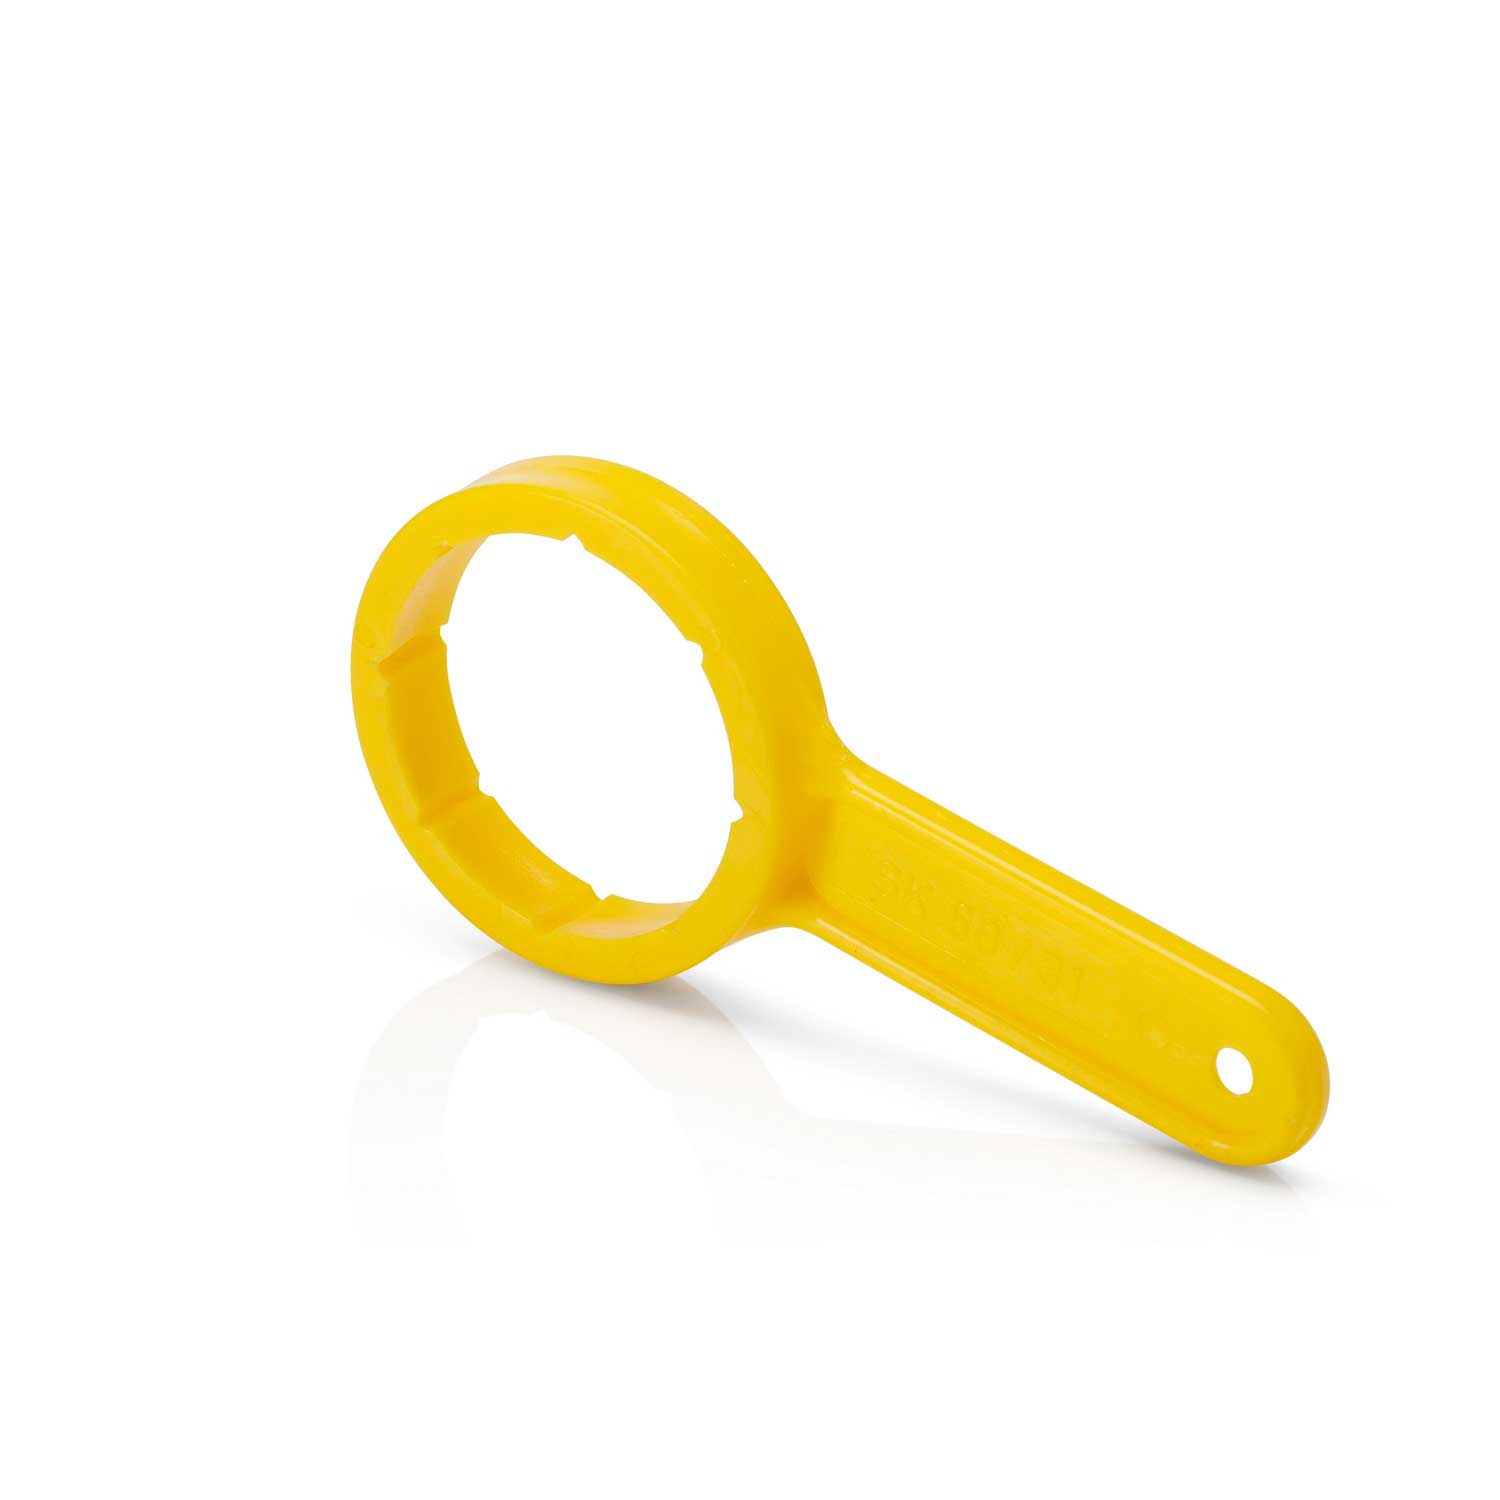 Distributors Of Cap Removal Tool to suit 51mm Caps